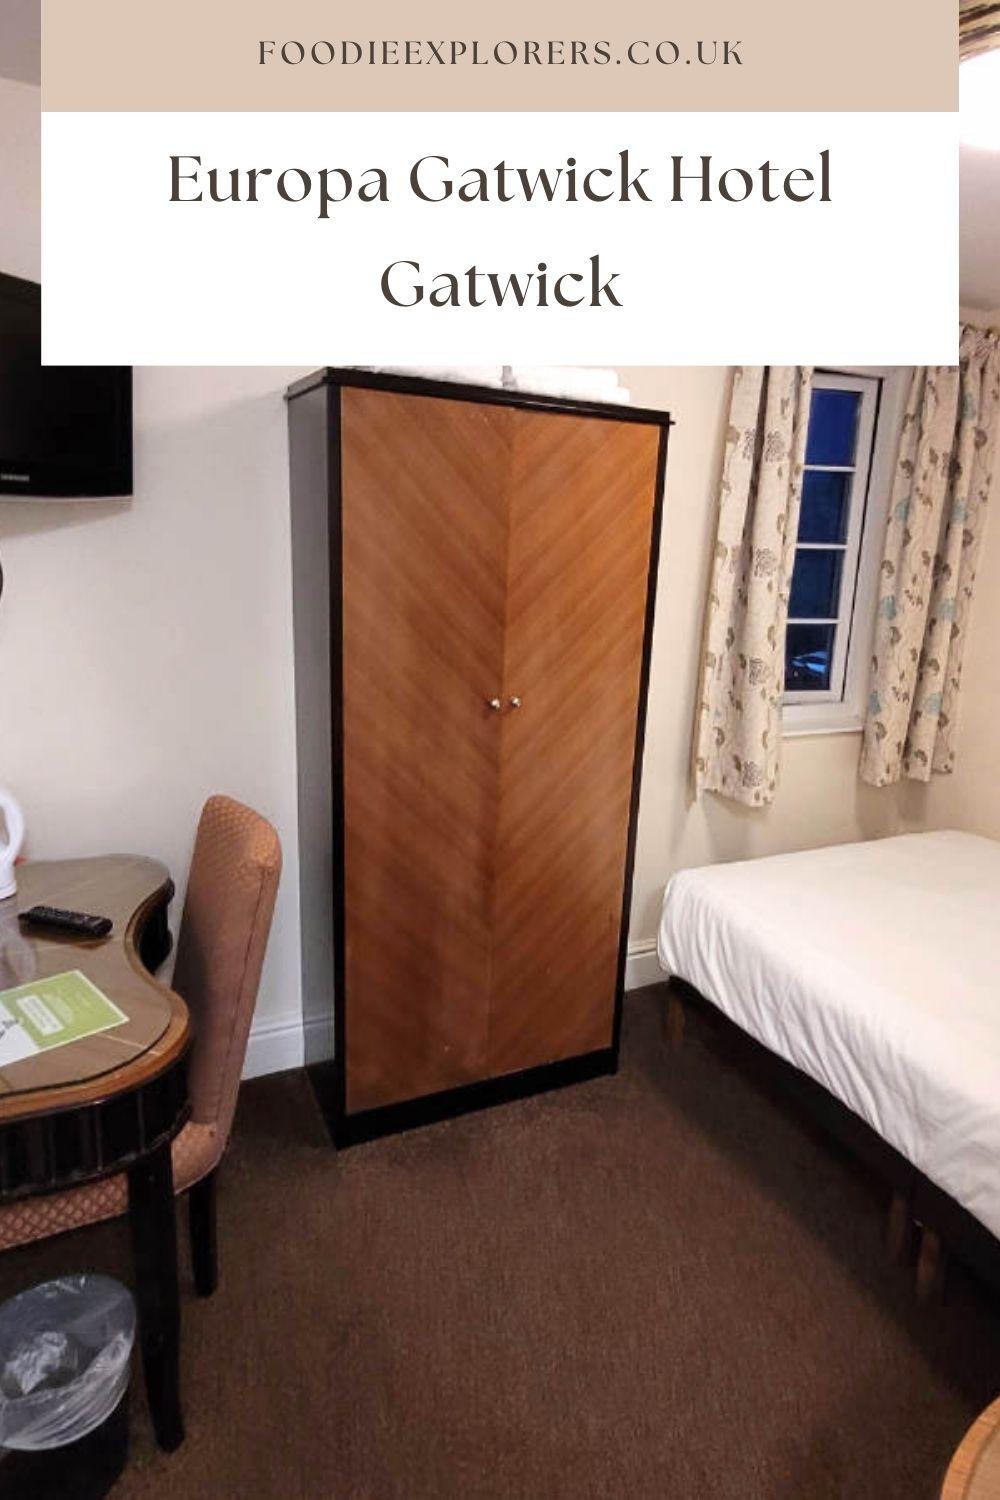 where not to stay at gatwick airport